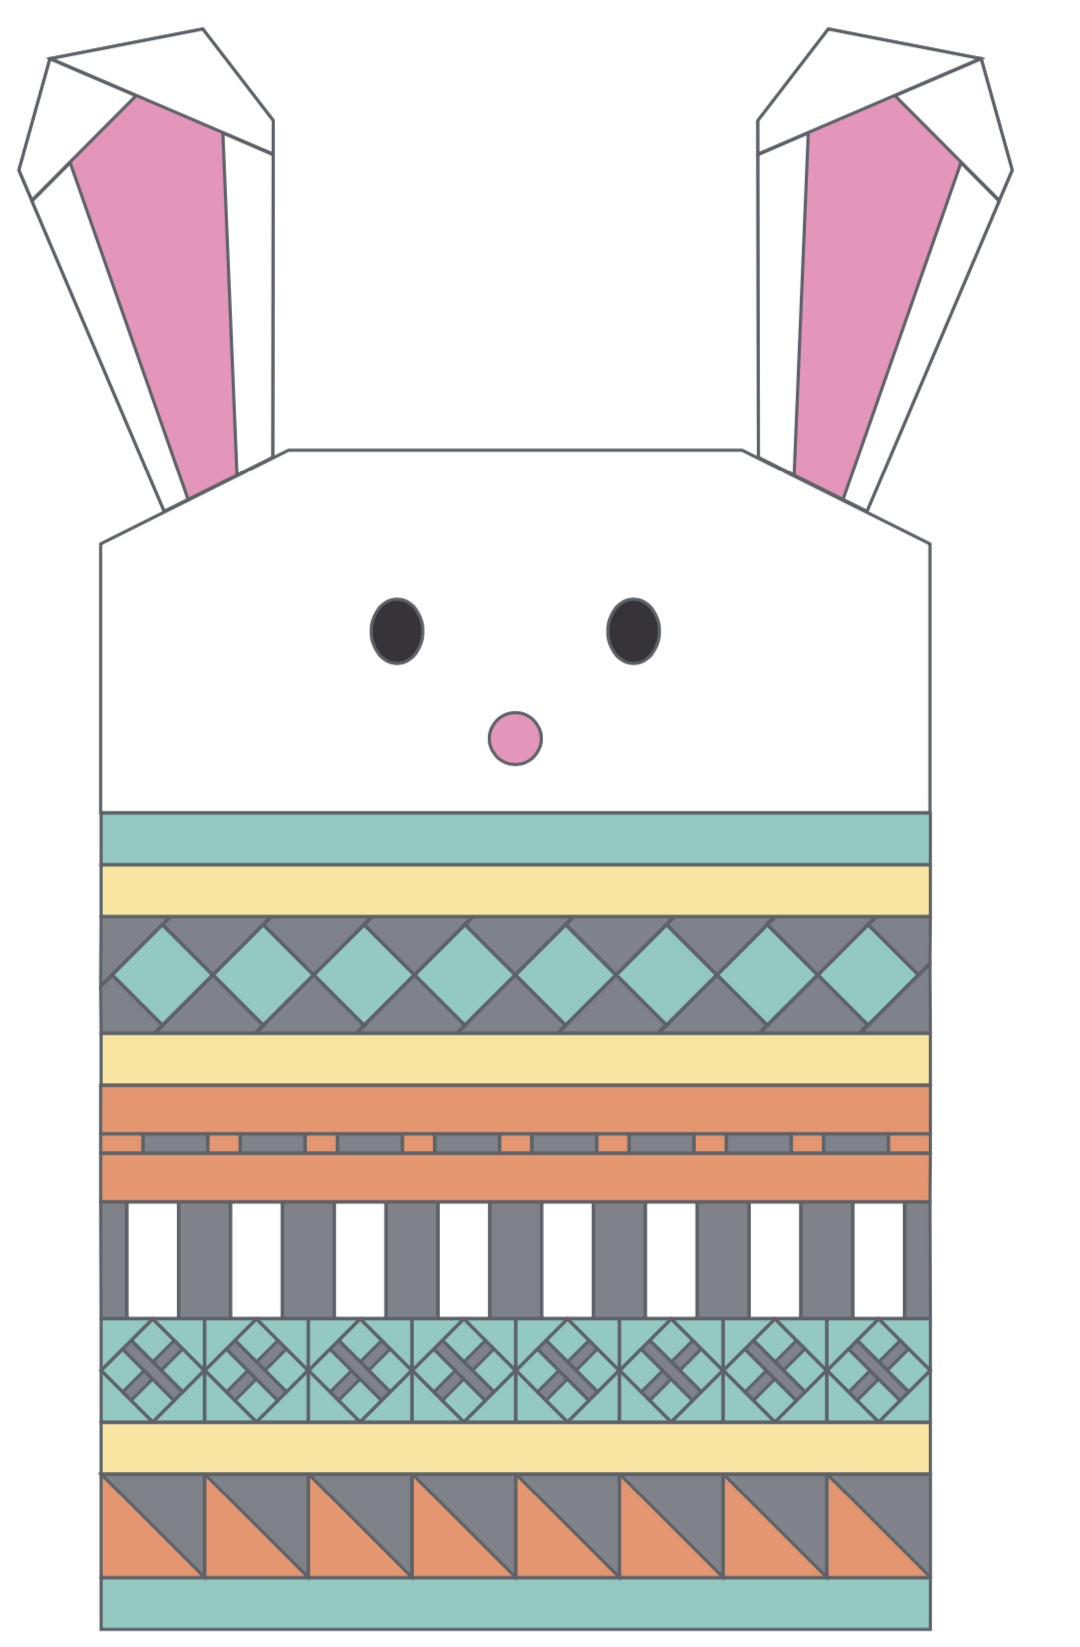 Bunny Quilt pattern layout diagram